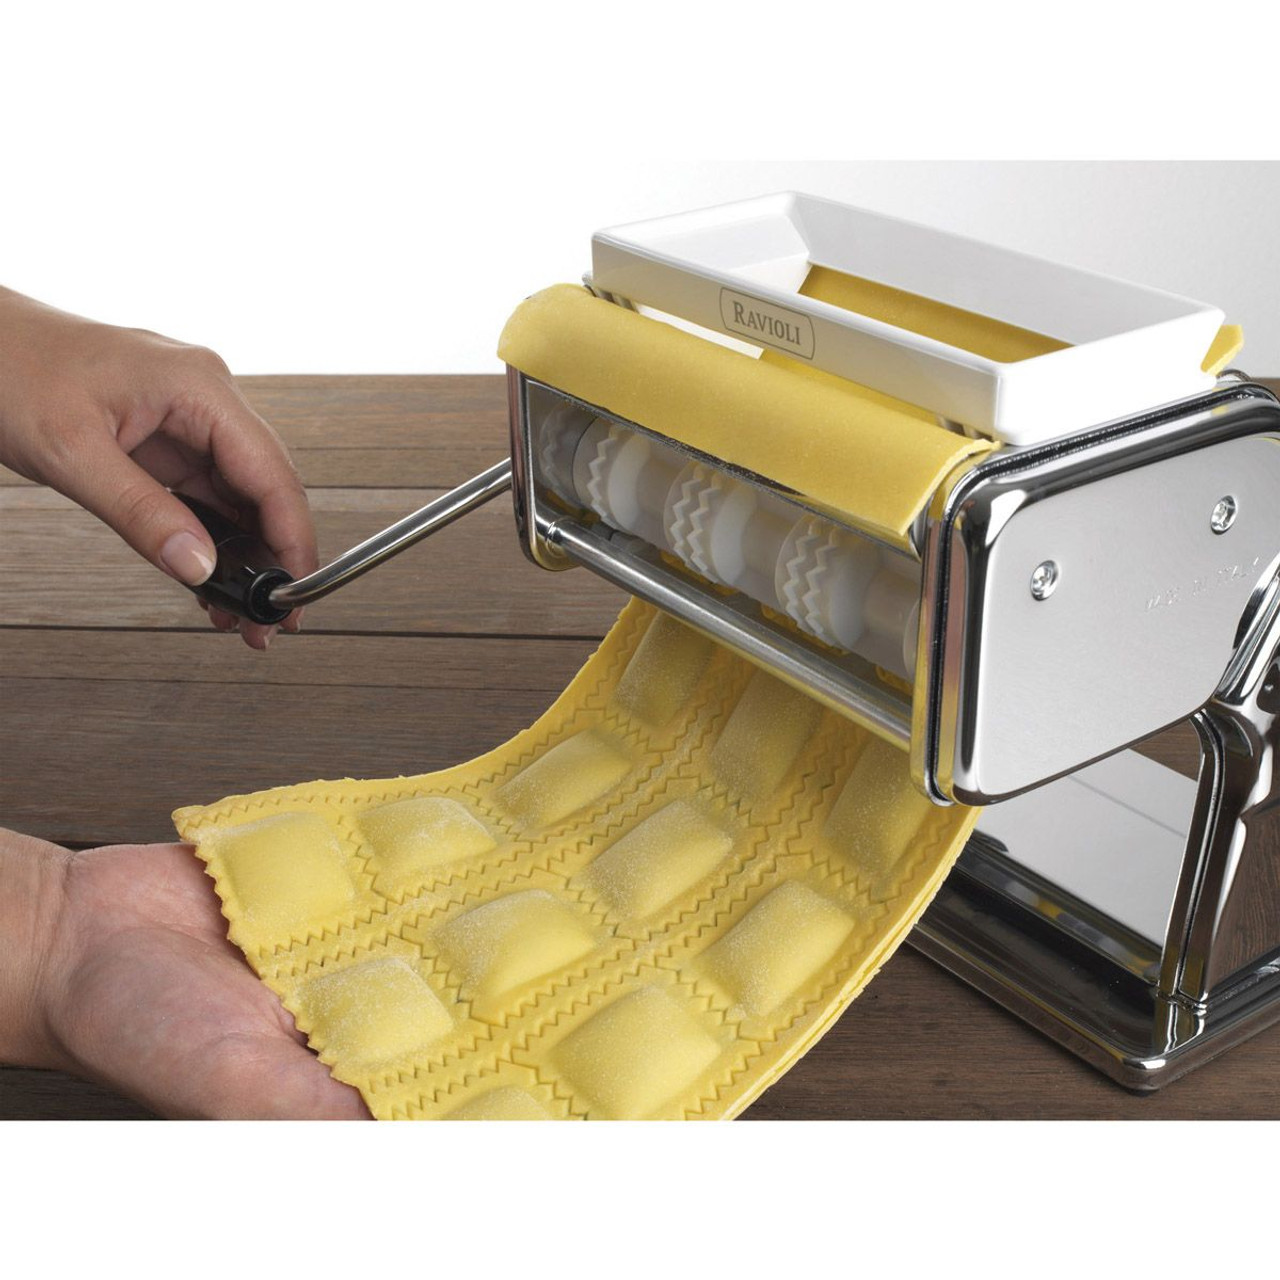 https://cdn11.bigcommerce.com/s-hccytny0od/images/stencil/1280x1280/products/4182/15638/marcato-atlas-ravioli-pasta-cutter-attachment-1__21114.1627135988.jpg?c=2?imbypass=on